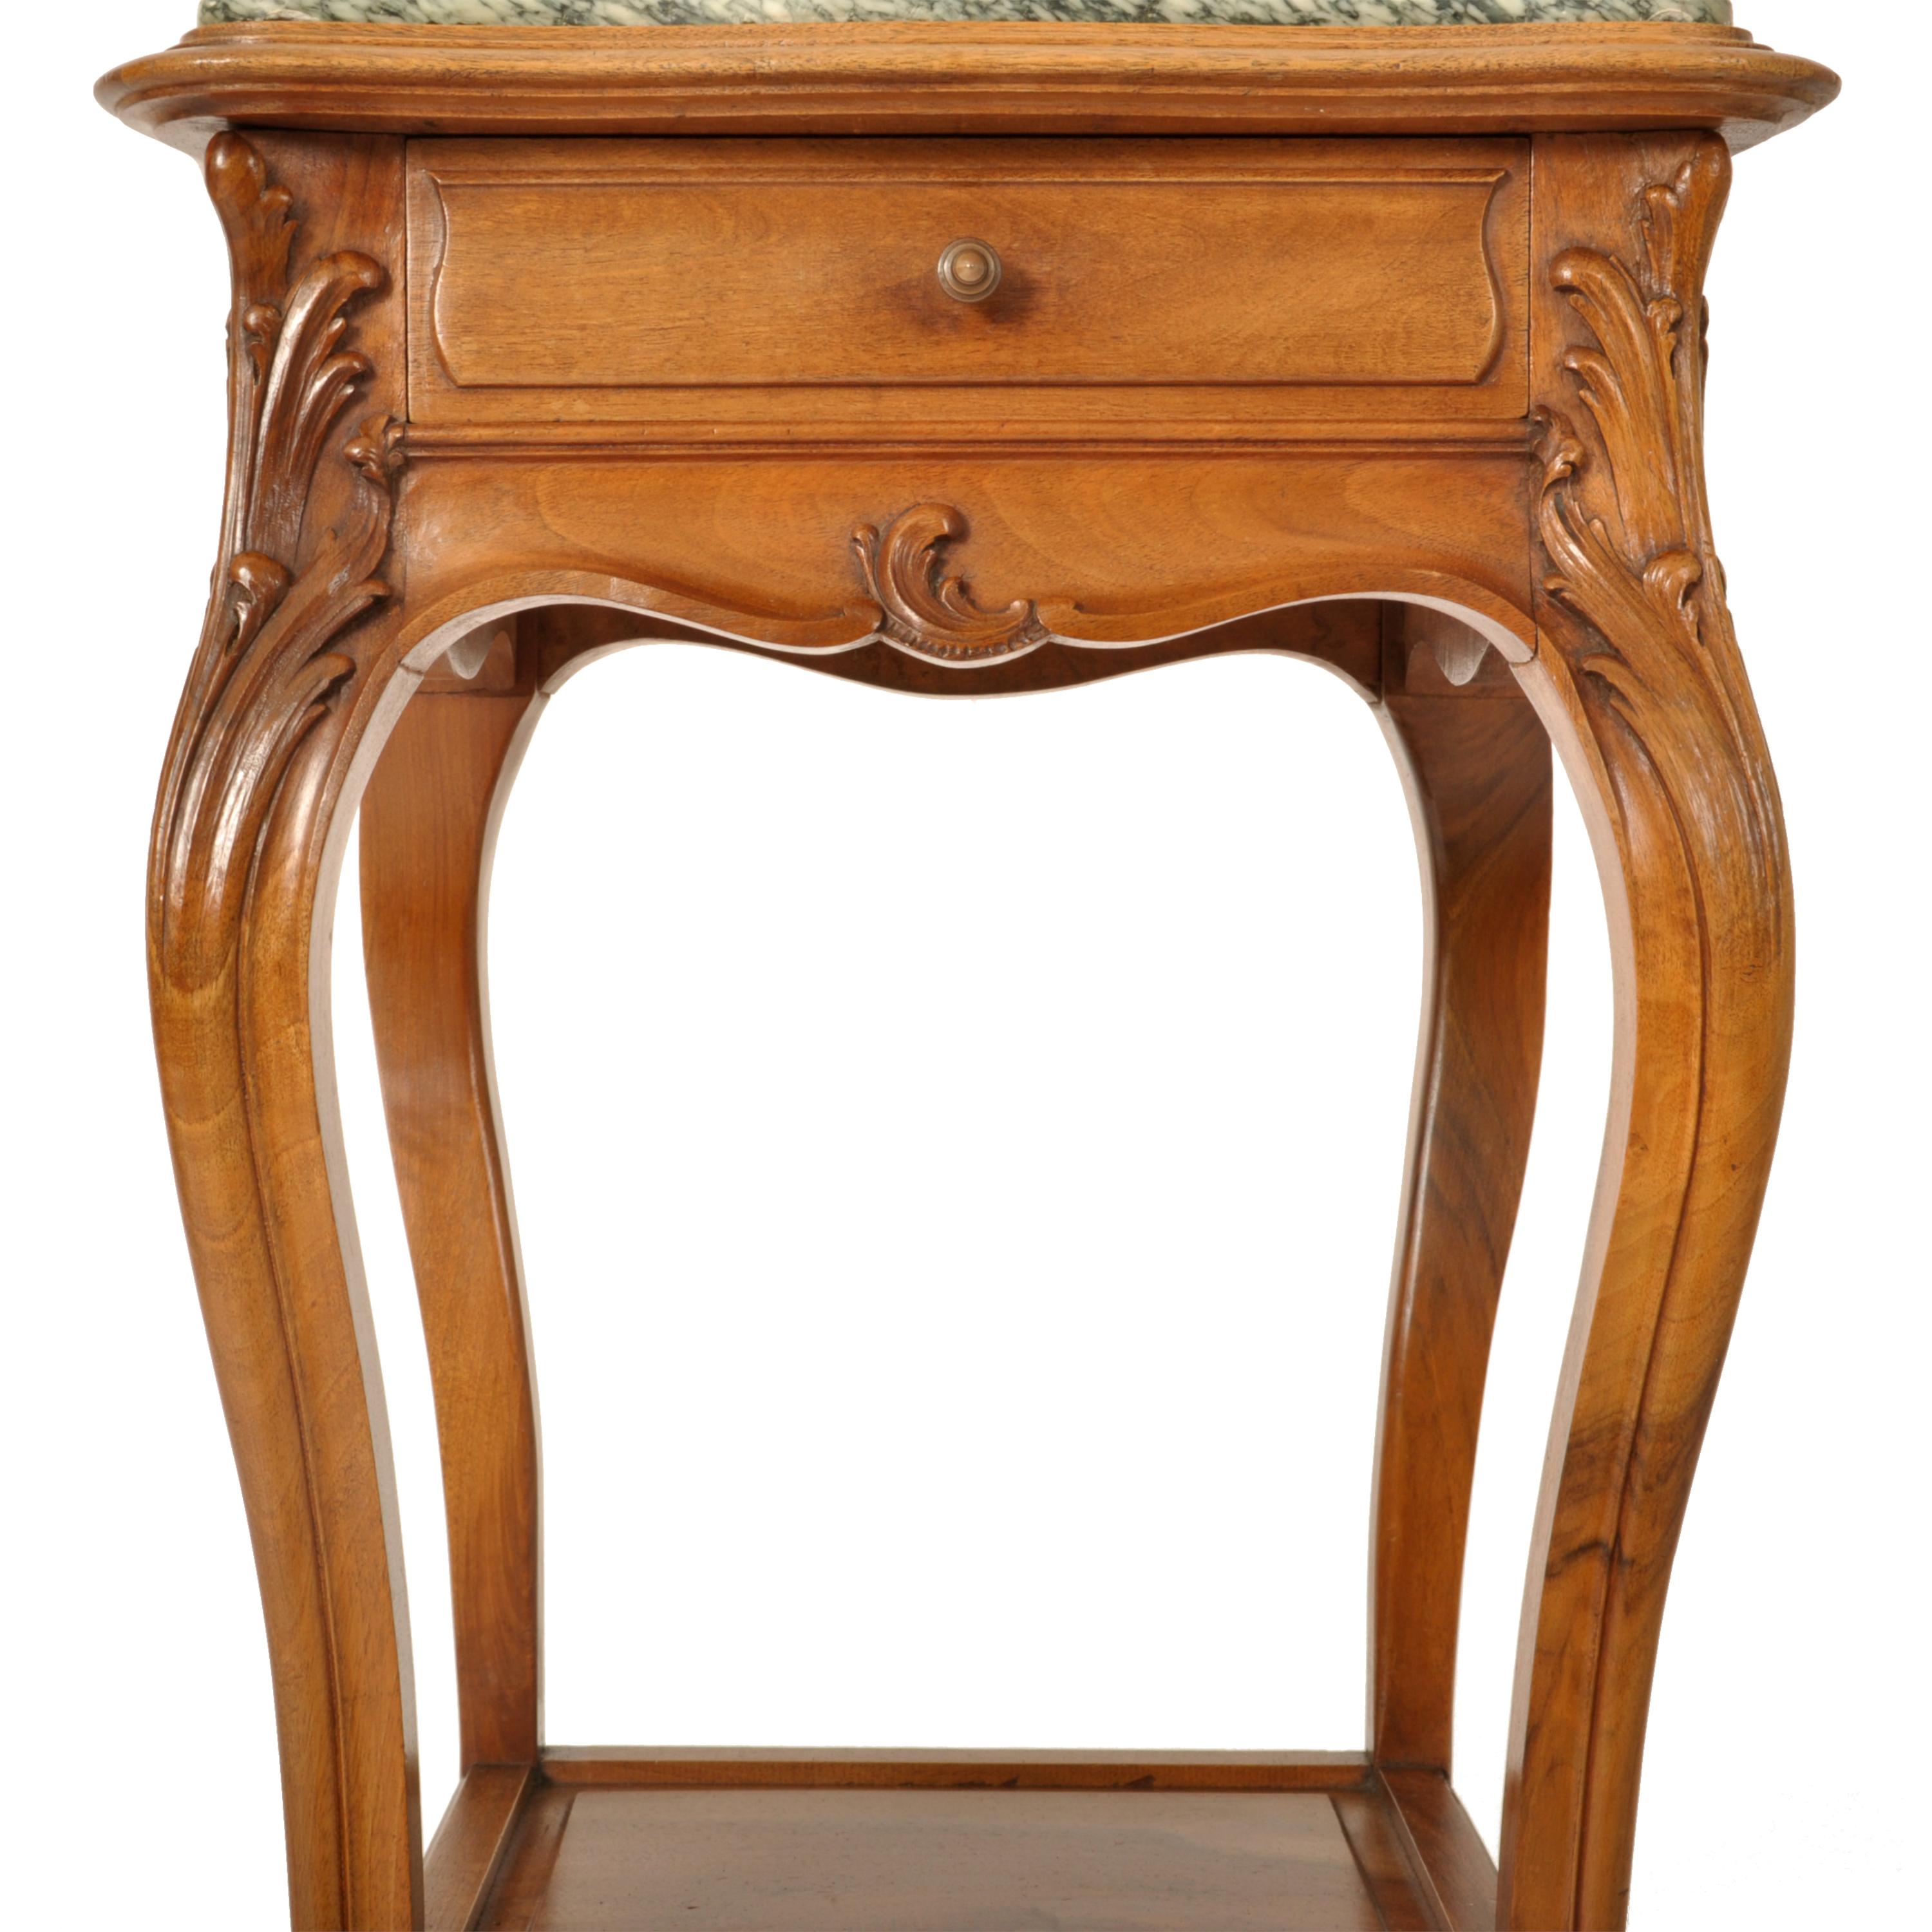 Antique French Provincial Art Nouveau Walnut & Marble Nightstand Side Table 1900 4